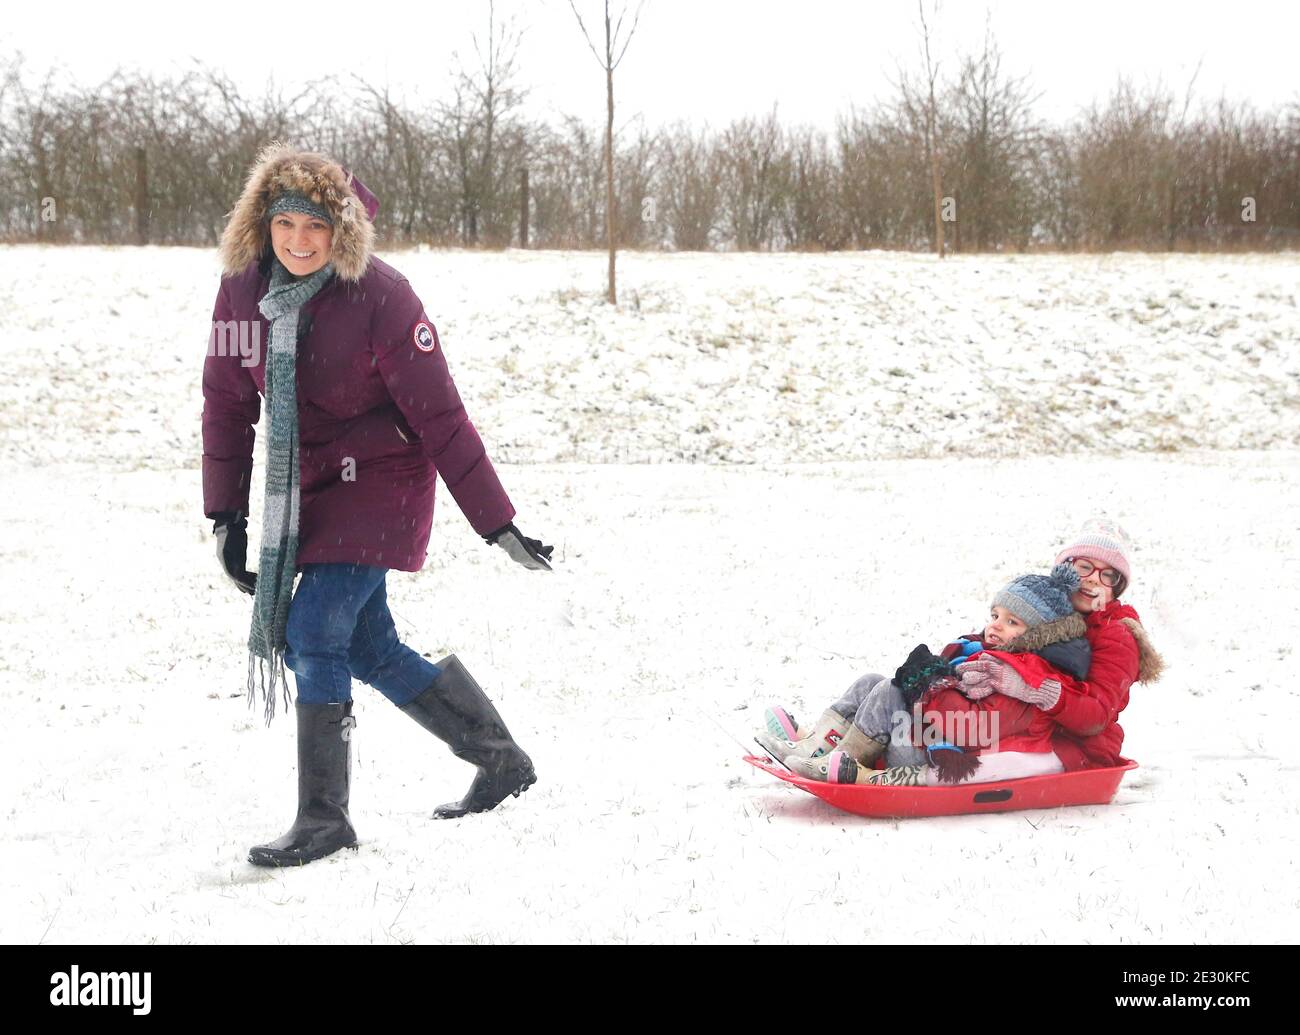 Haverhill, Suffolk UK. 16th January 2021. Elizabeth Mitchell with her children Ivy 5 and Albert 3 have fun in the snow. Credit: Headlinephoto/Alamy Live News. Stock Photo